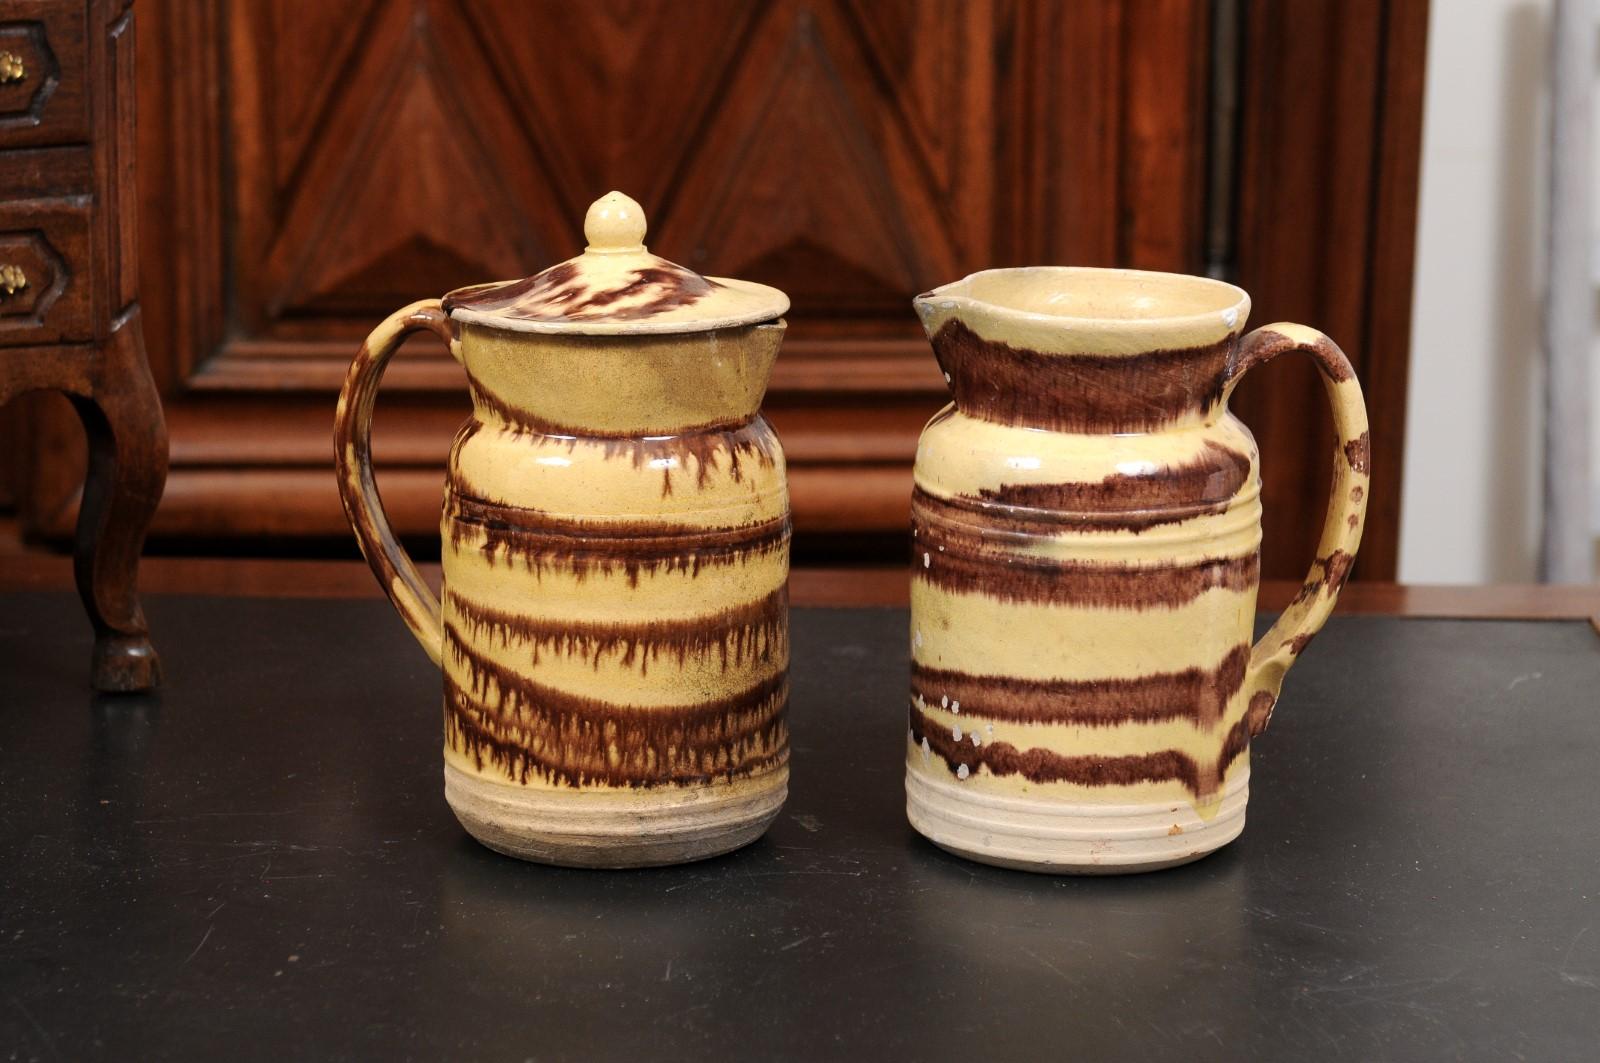 Two French pottery pitchers from the 19th century with cream and brown glaze, priced and sold individually $395 each. Created in France during the 19th century, these pitchers feature a cream ground beautifully contrasted by a brown glaze applied